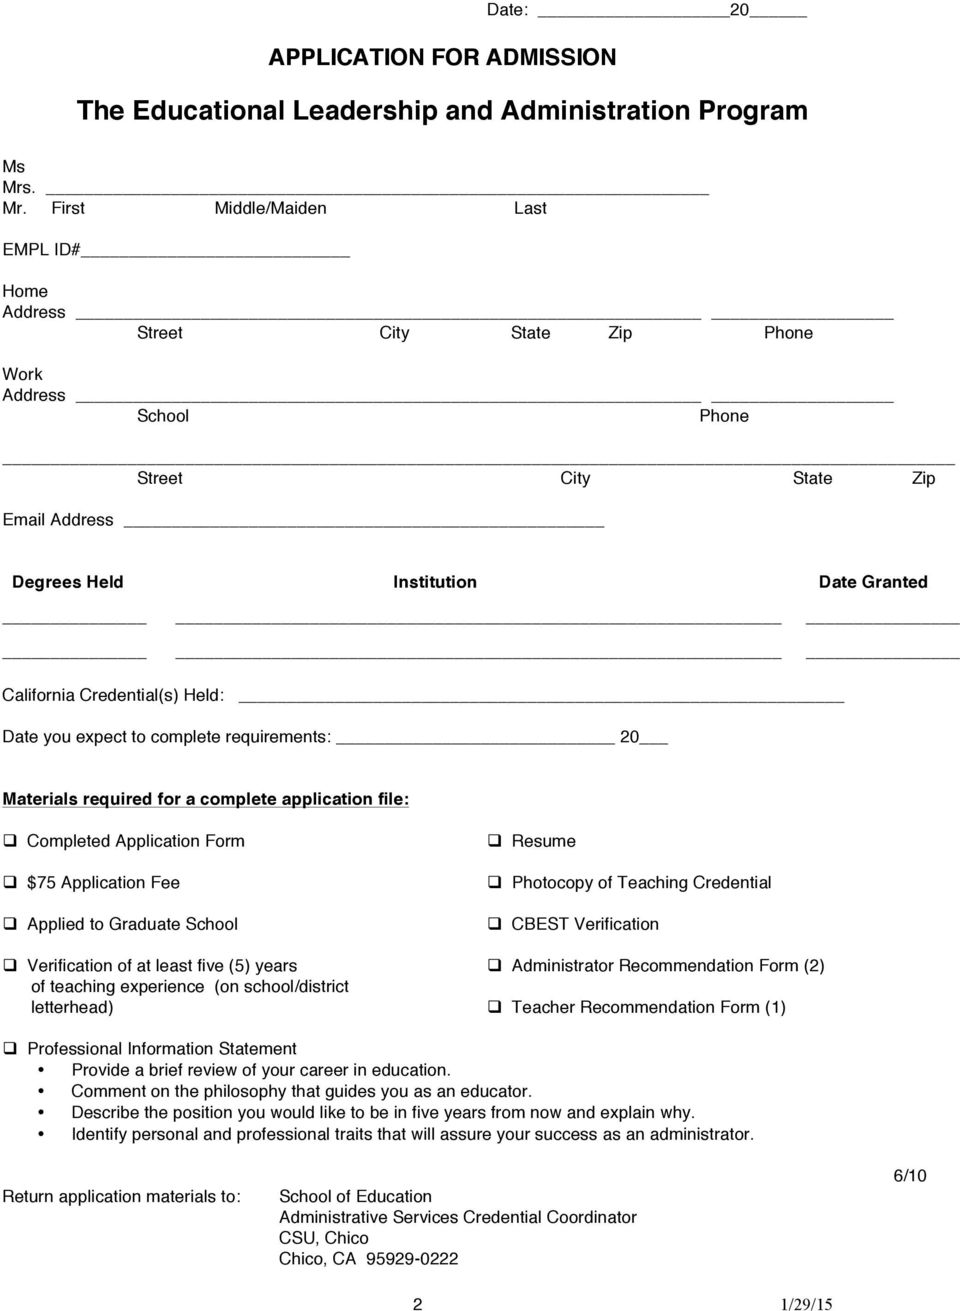 Credential(s) Held: Date you expect to complete requirements: 20 Materials required for a complete application file: Completed Application Form $75 Application Fee Applied to Graduate School Resume